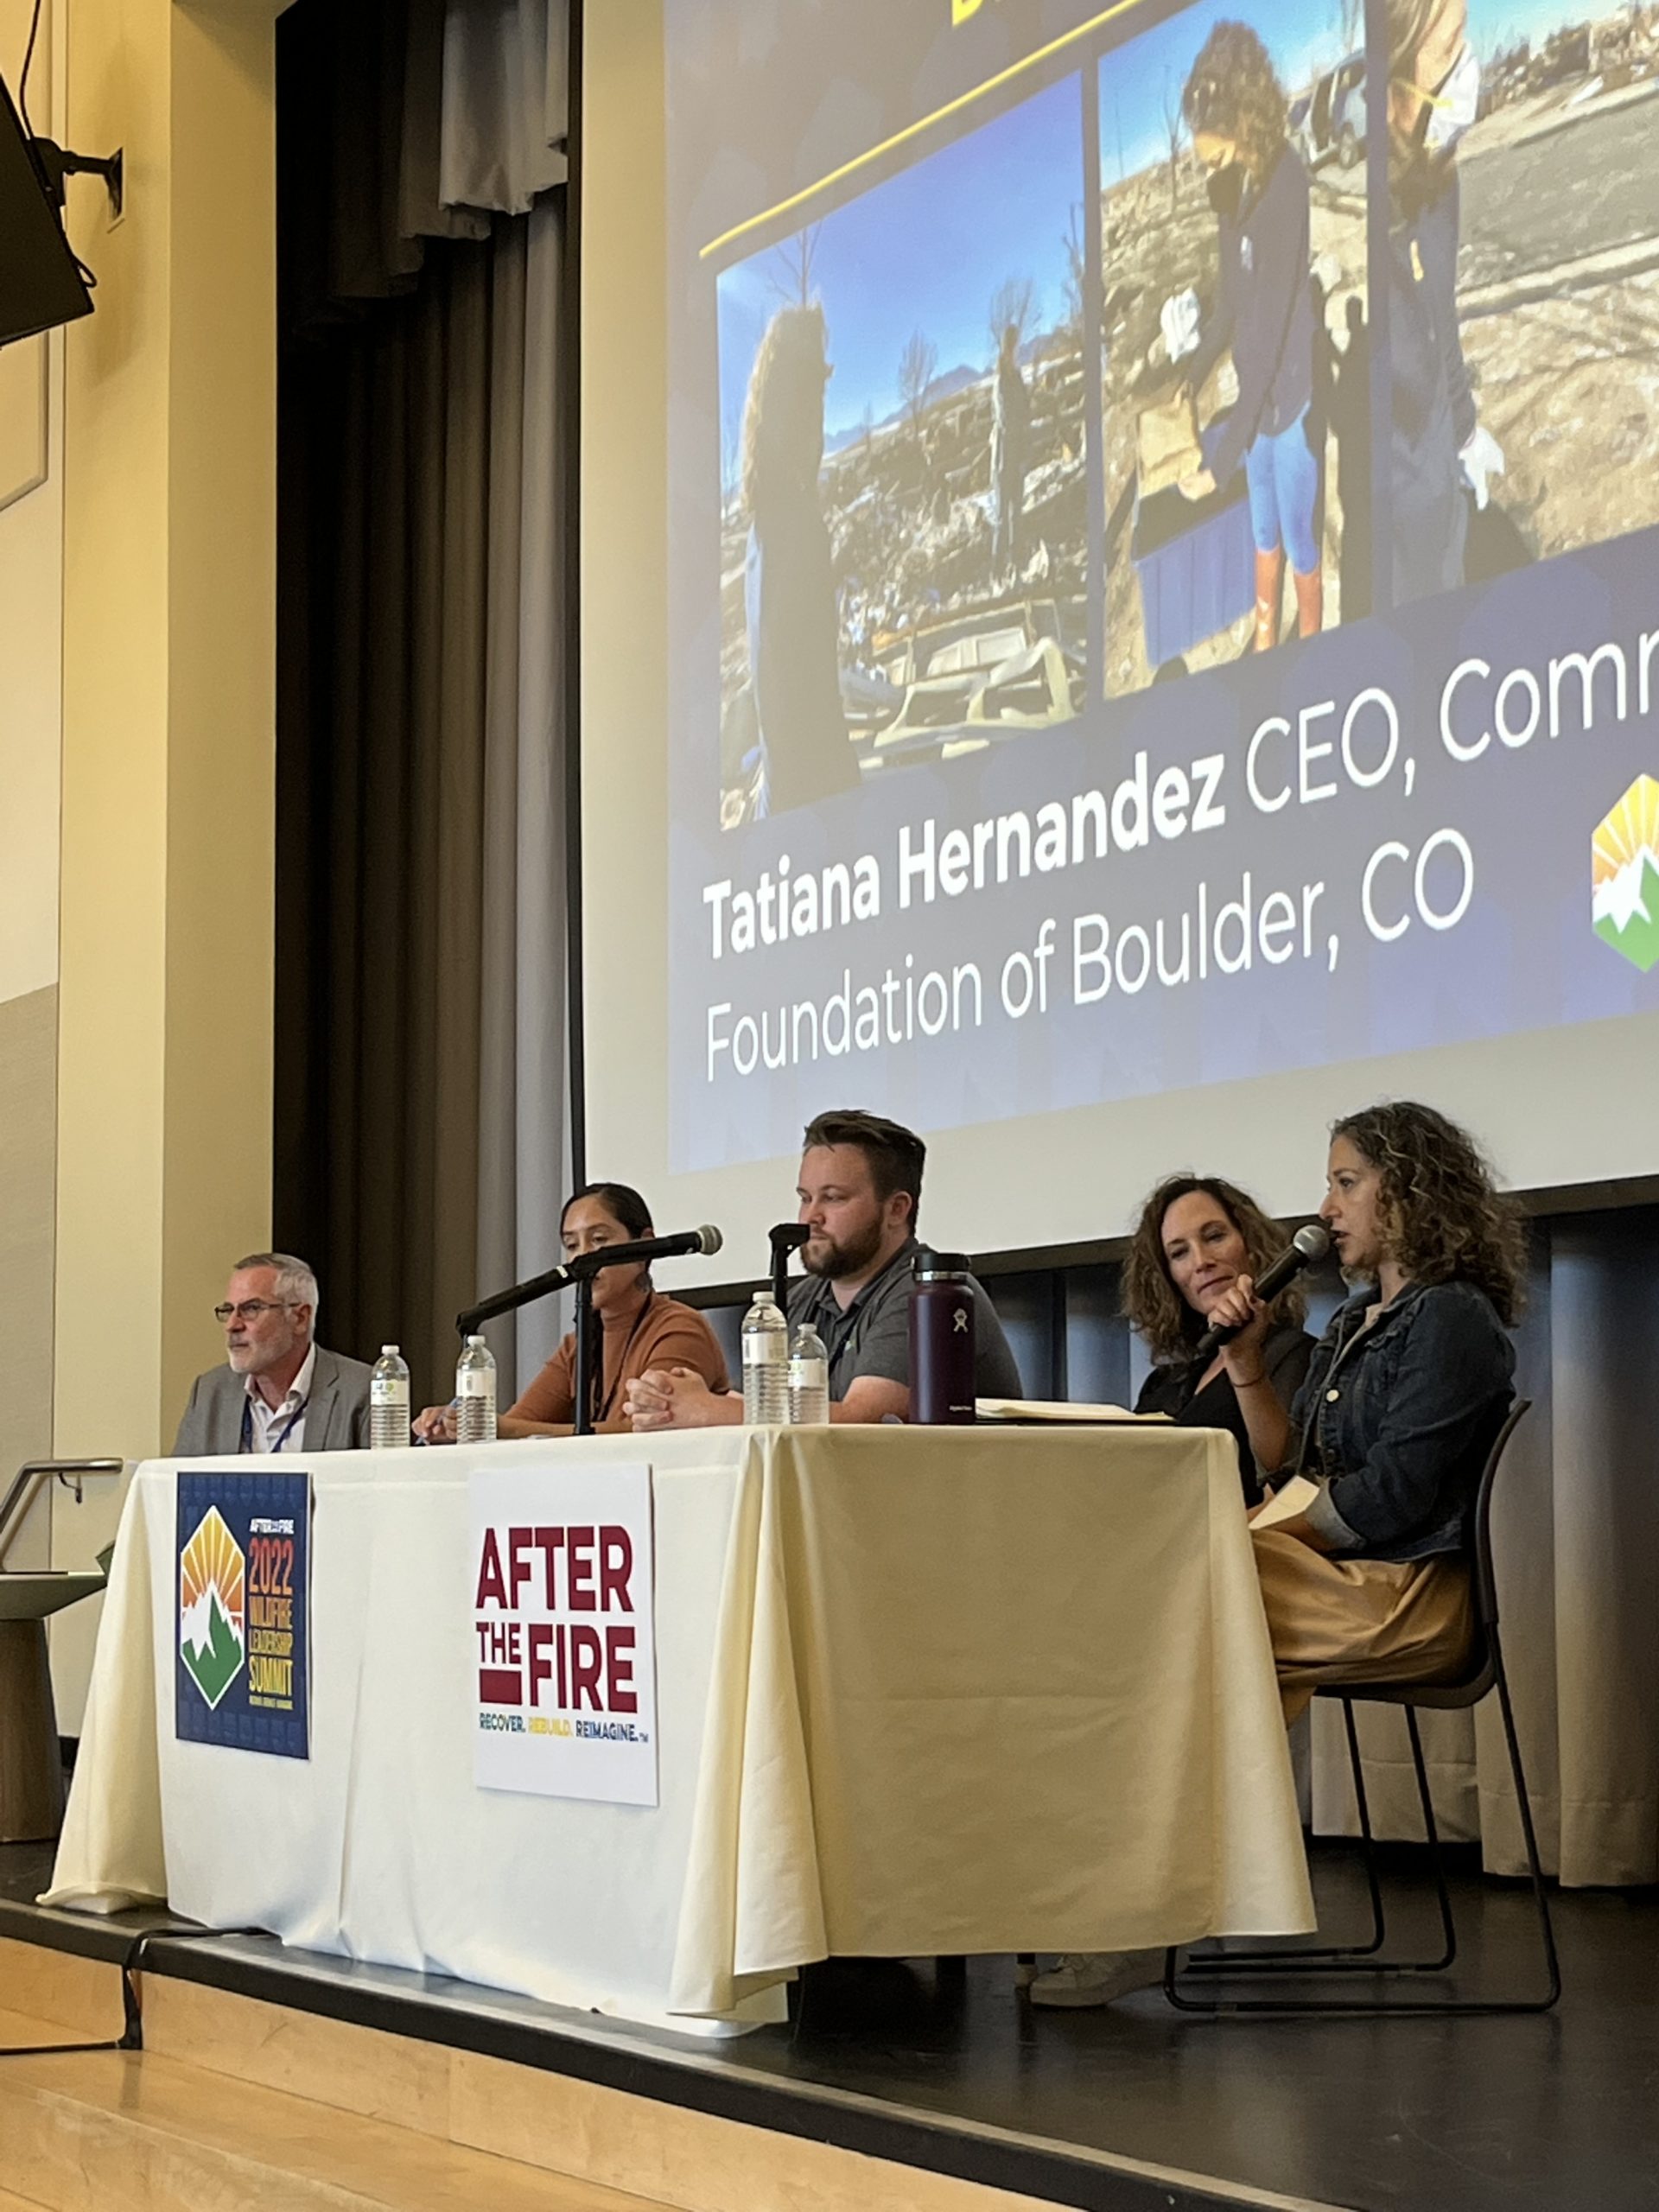 Tatiana Hernandez, CEO of the Community Foundation of Boulder, CO speaks on the panel about philanthropy after disaster